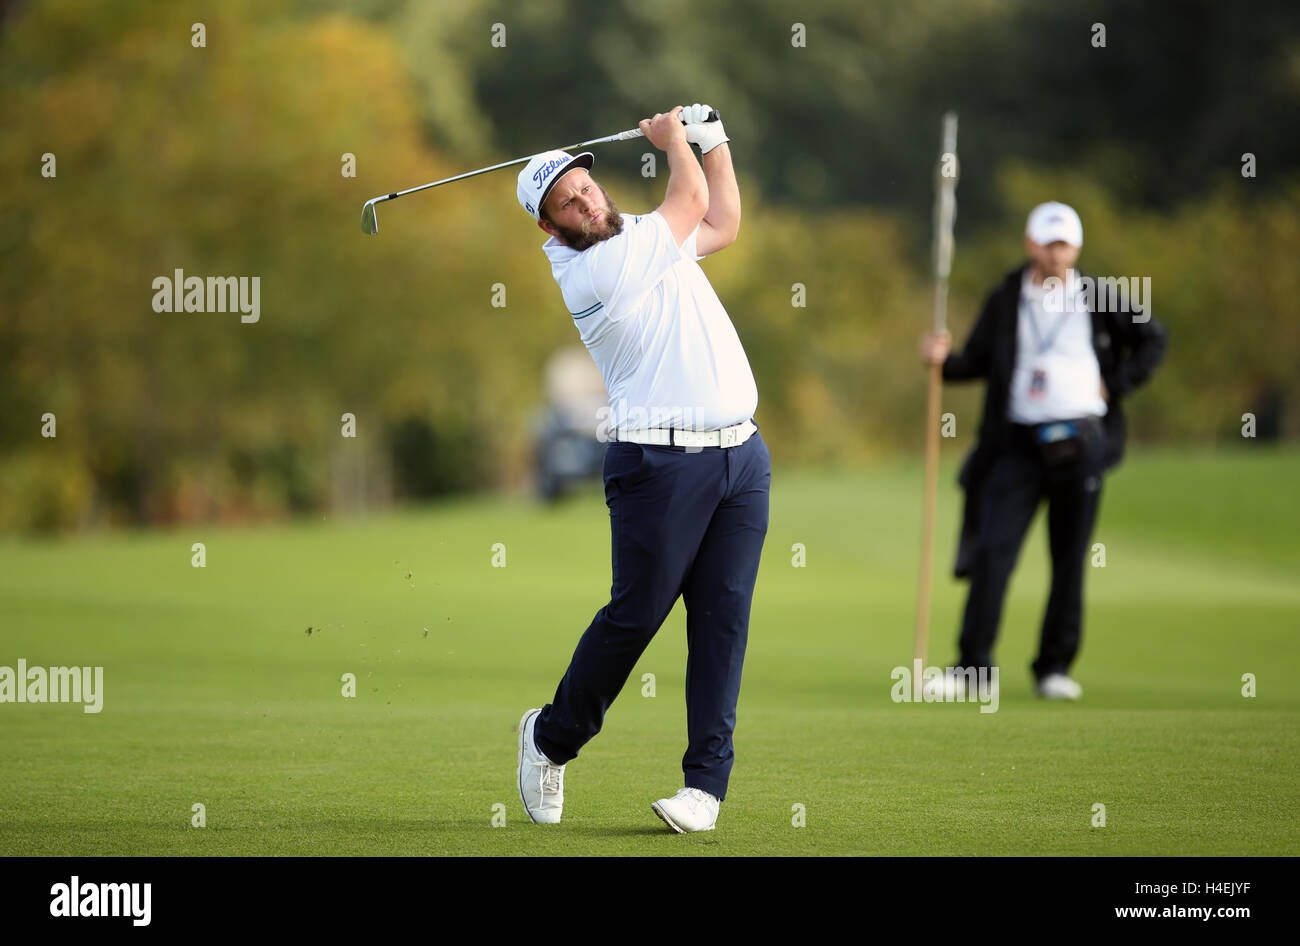 England's Andrew Johnston plays a shot on the 8th hole during day three of The British Masters at The Grove, Chandler's Cross. Stock Photo